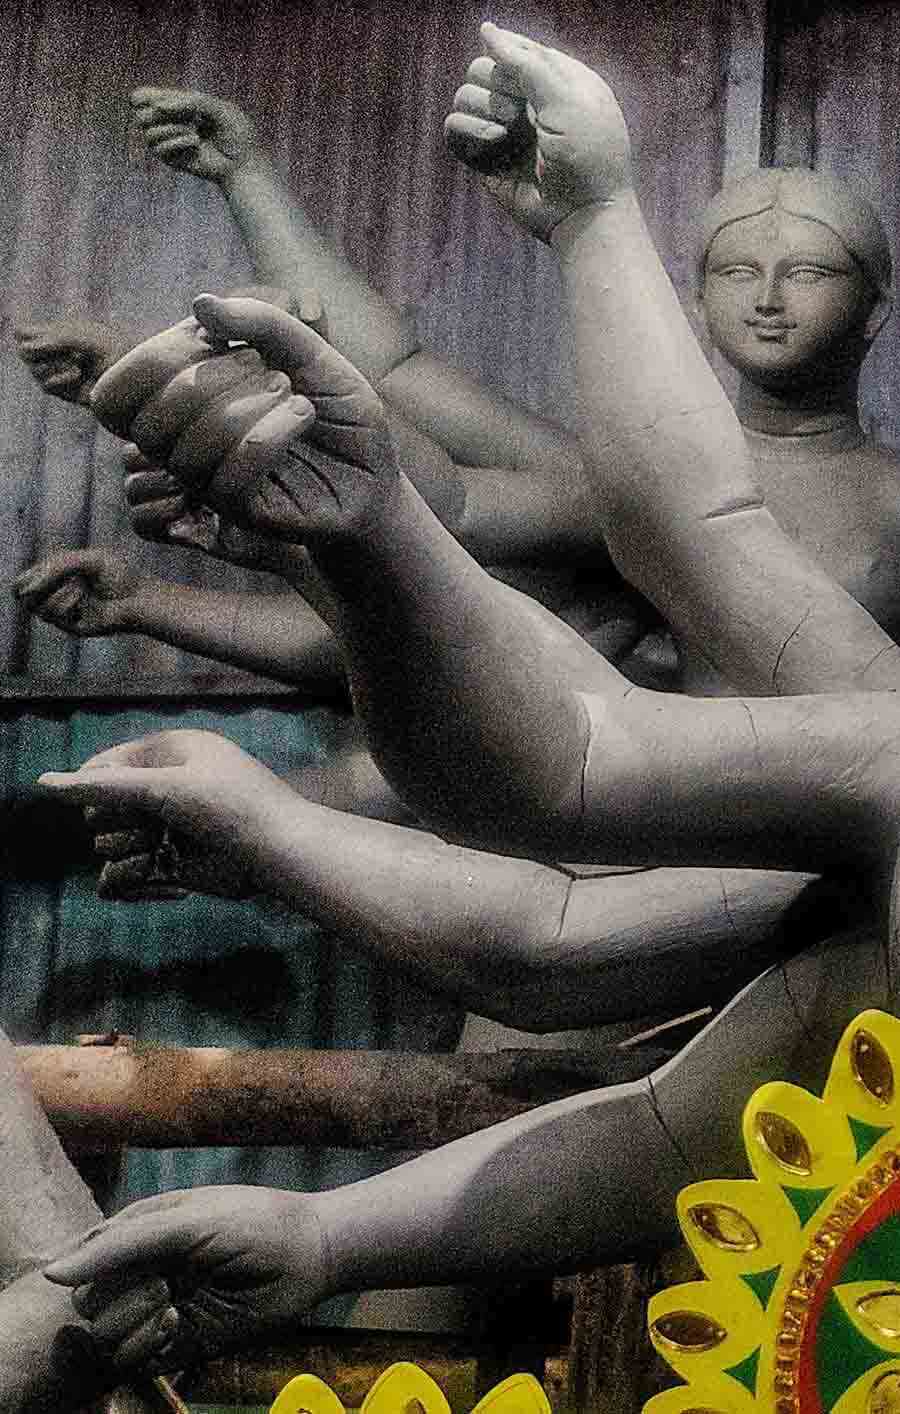 A Durga idol being made in a studio at Siliguri on Friday. Durga Puja starts on October 20 this year